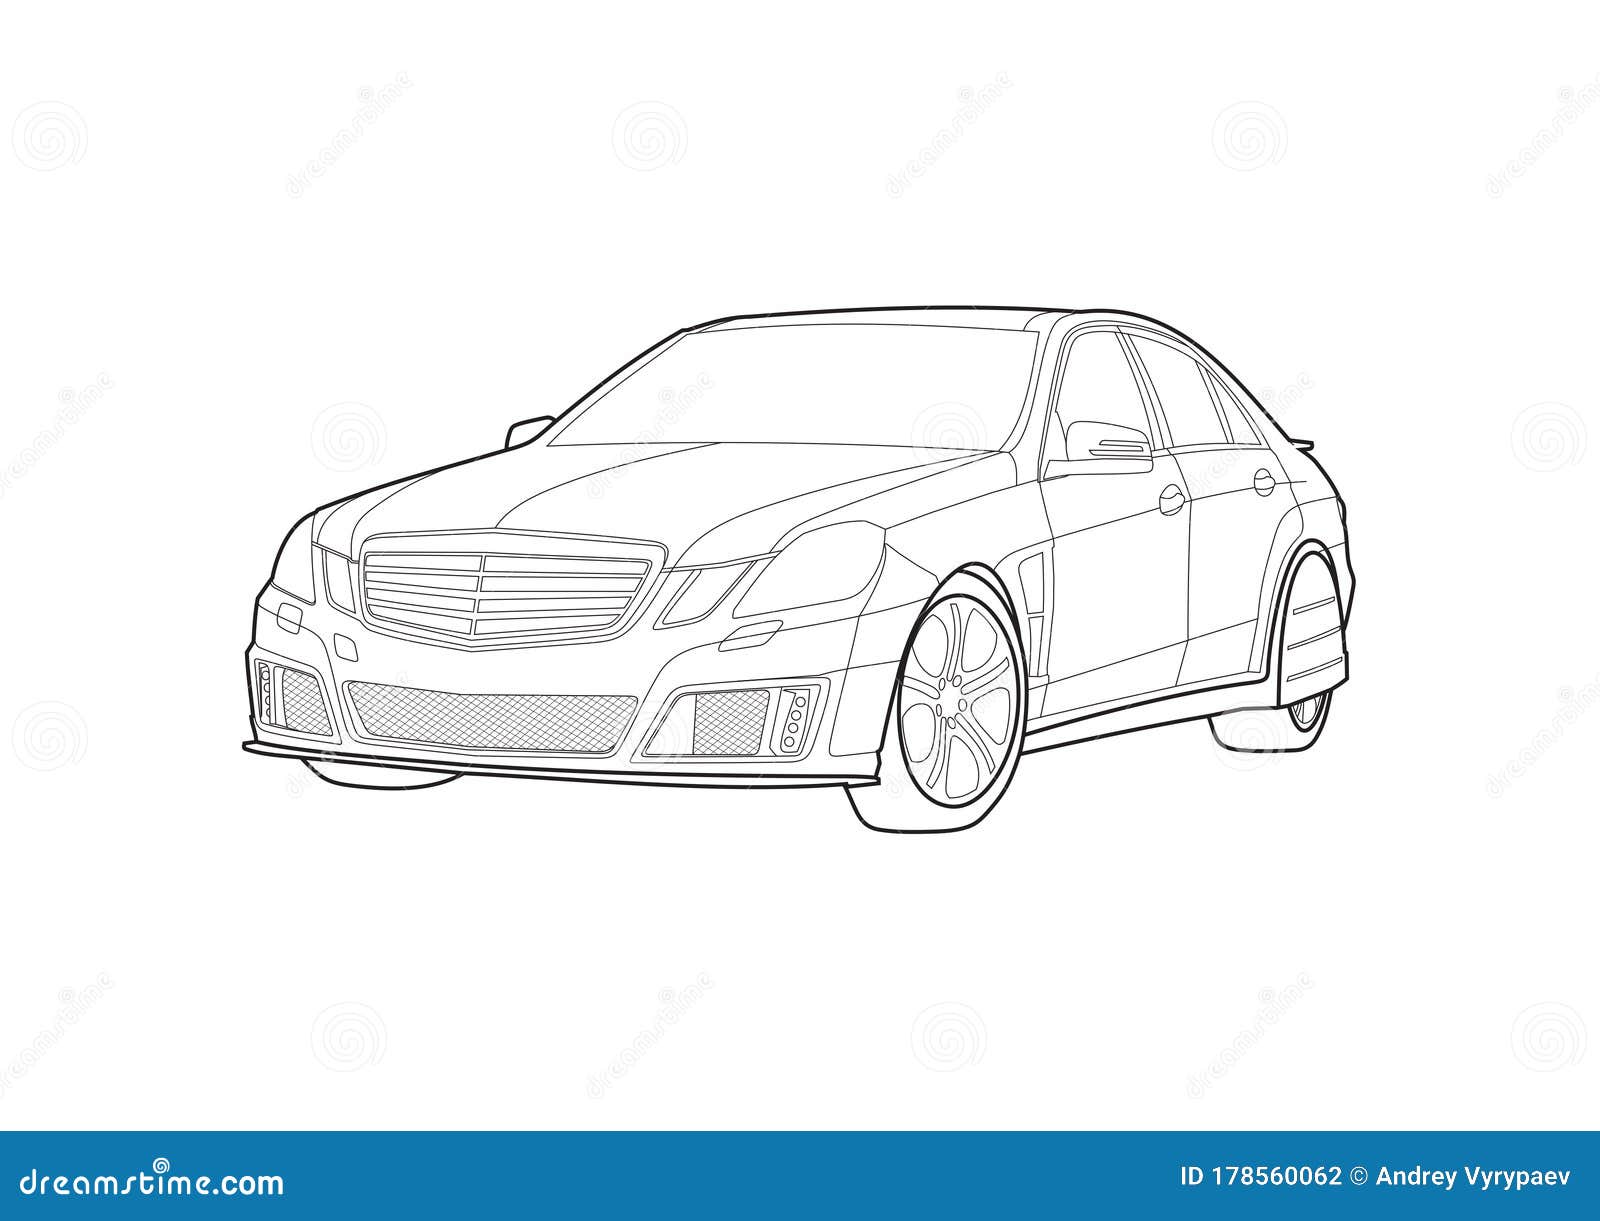 How to draw MercedesBenz SLS AMG Black Series  Sketchok easy drawing  guides